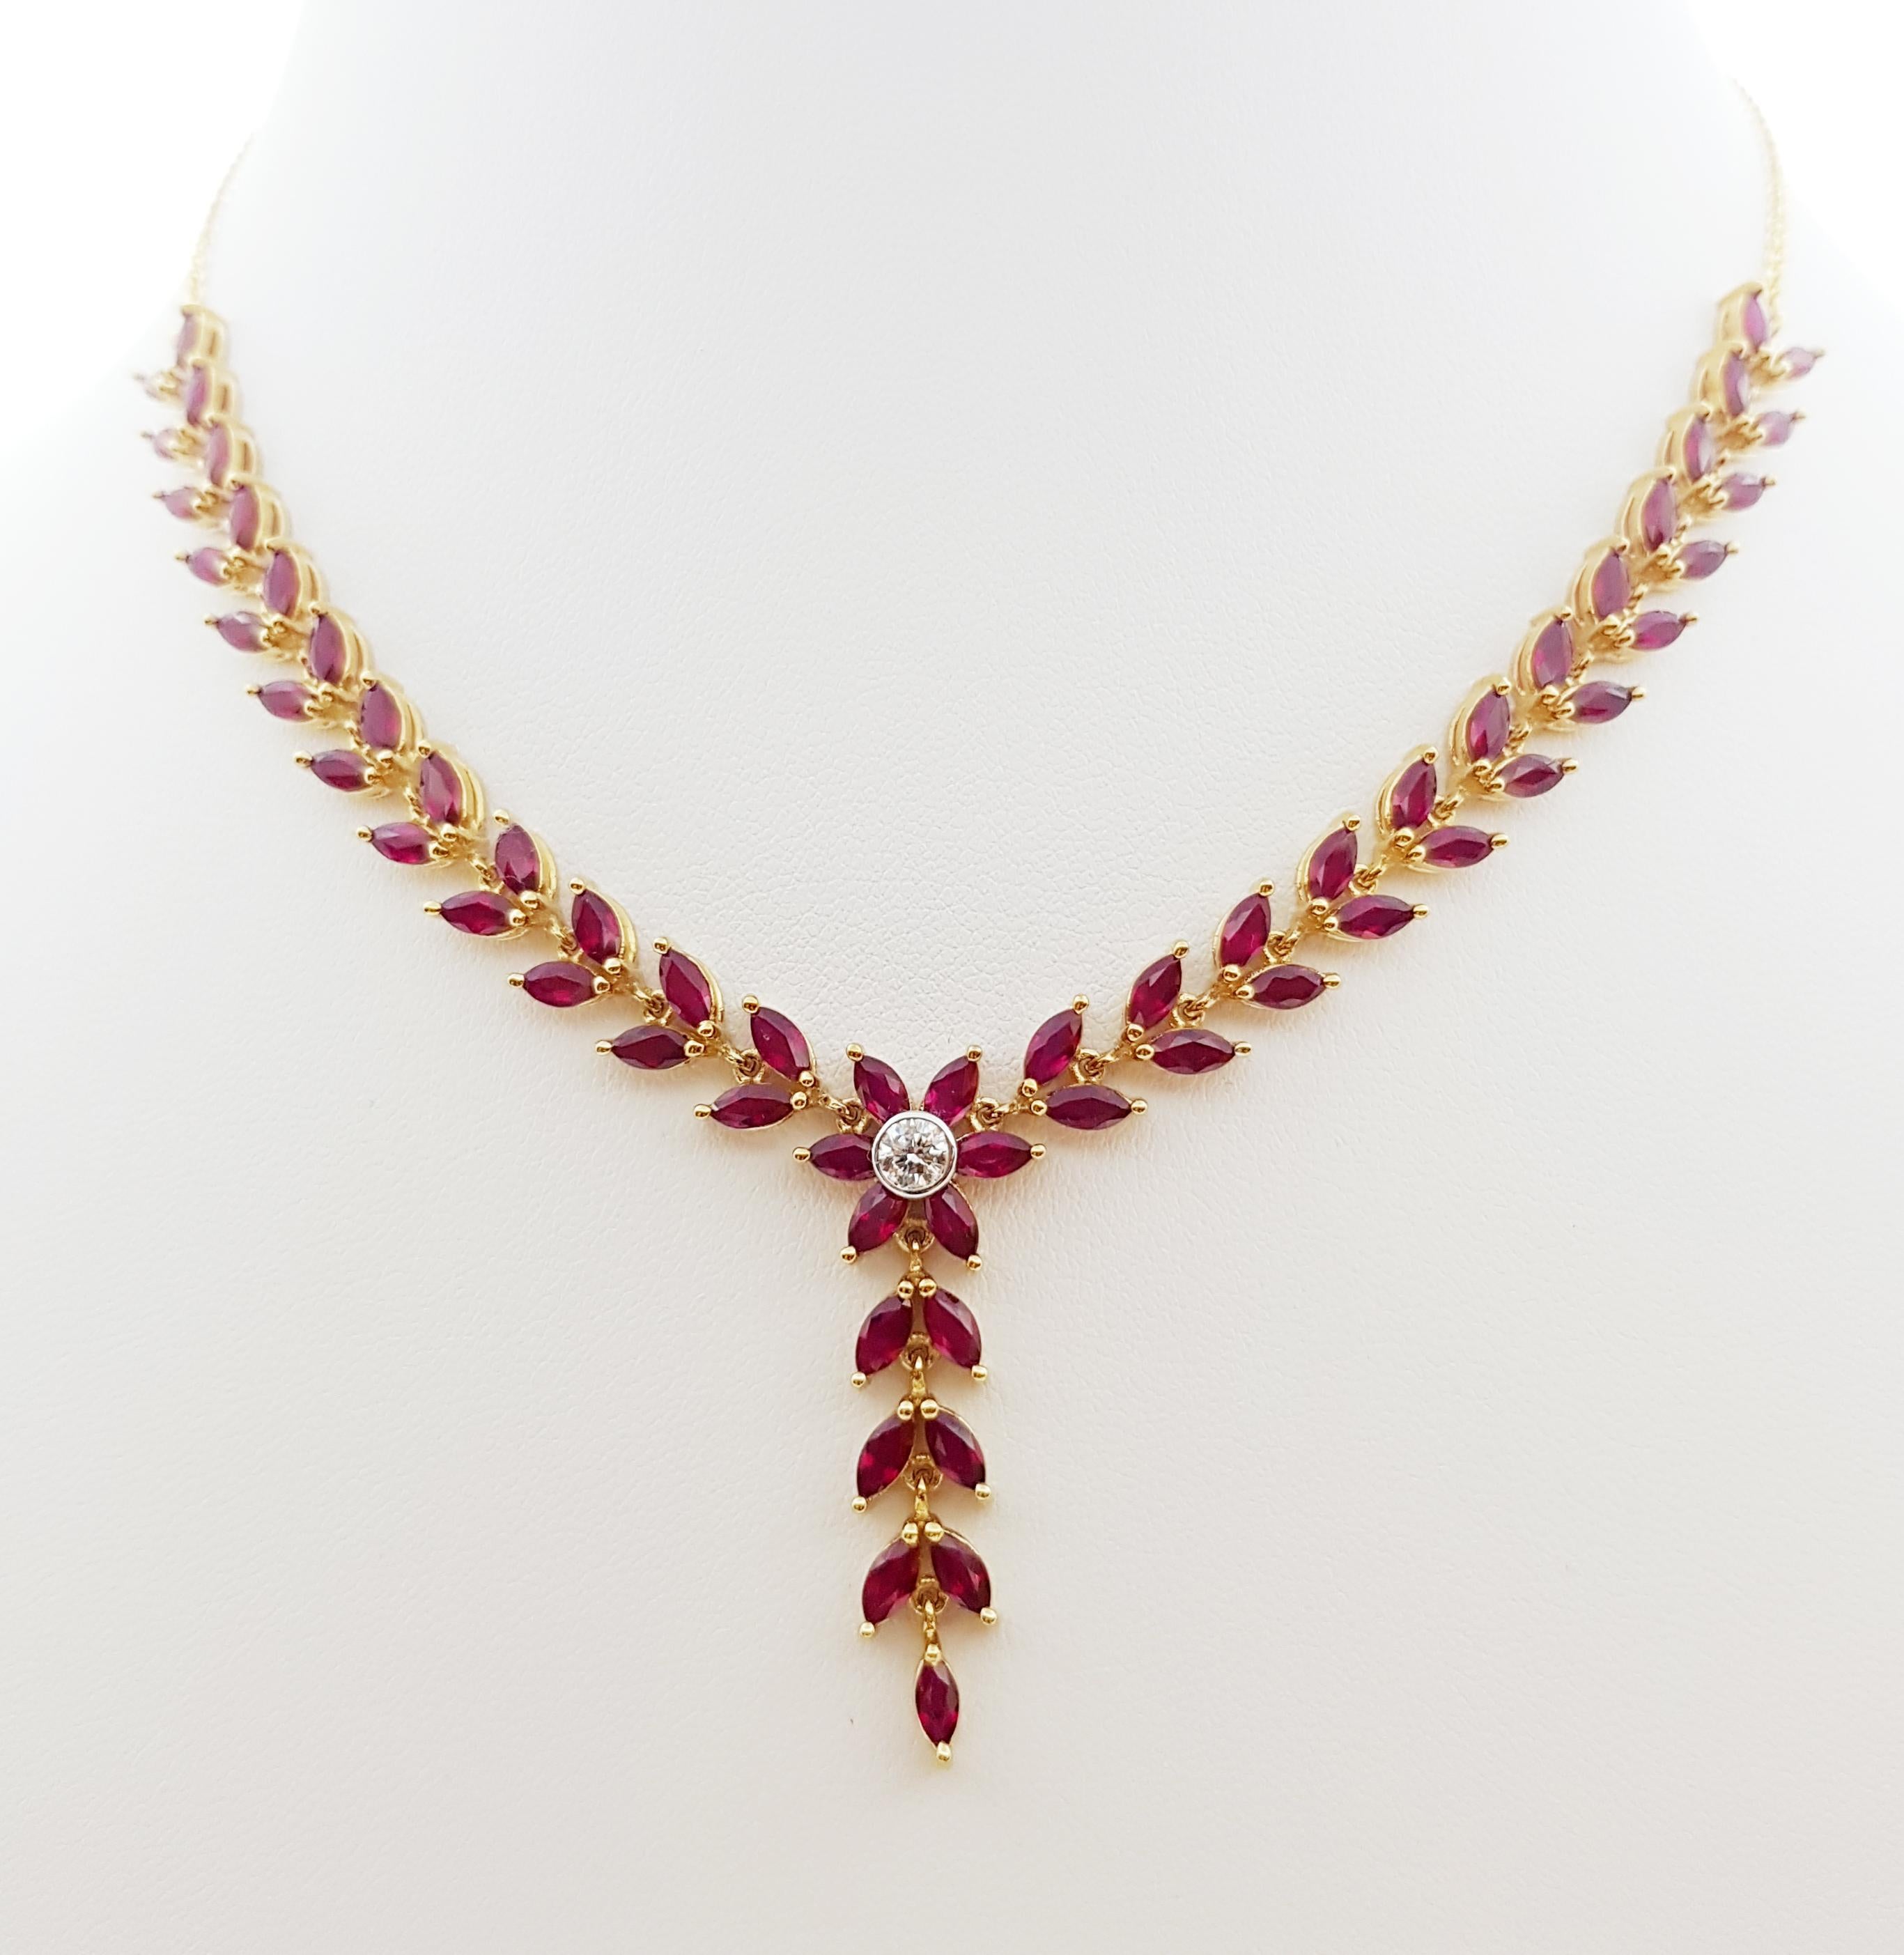 Ruby 10.91 carats with Diamond 0.23 carat Necklace set in 18 Karat  Gold Settings

Width: 3.9 cm 
Length: 39.9 cm
Total Weight: 21.43 grams

